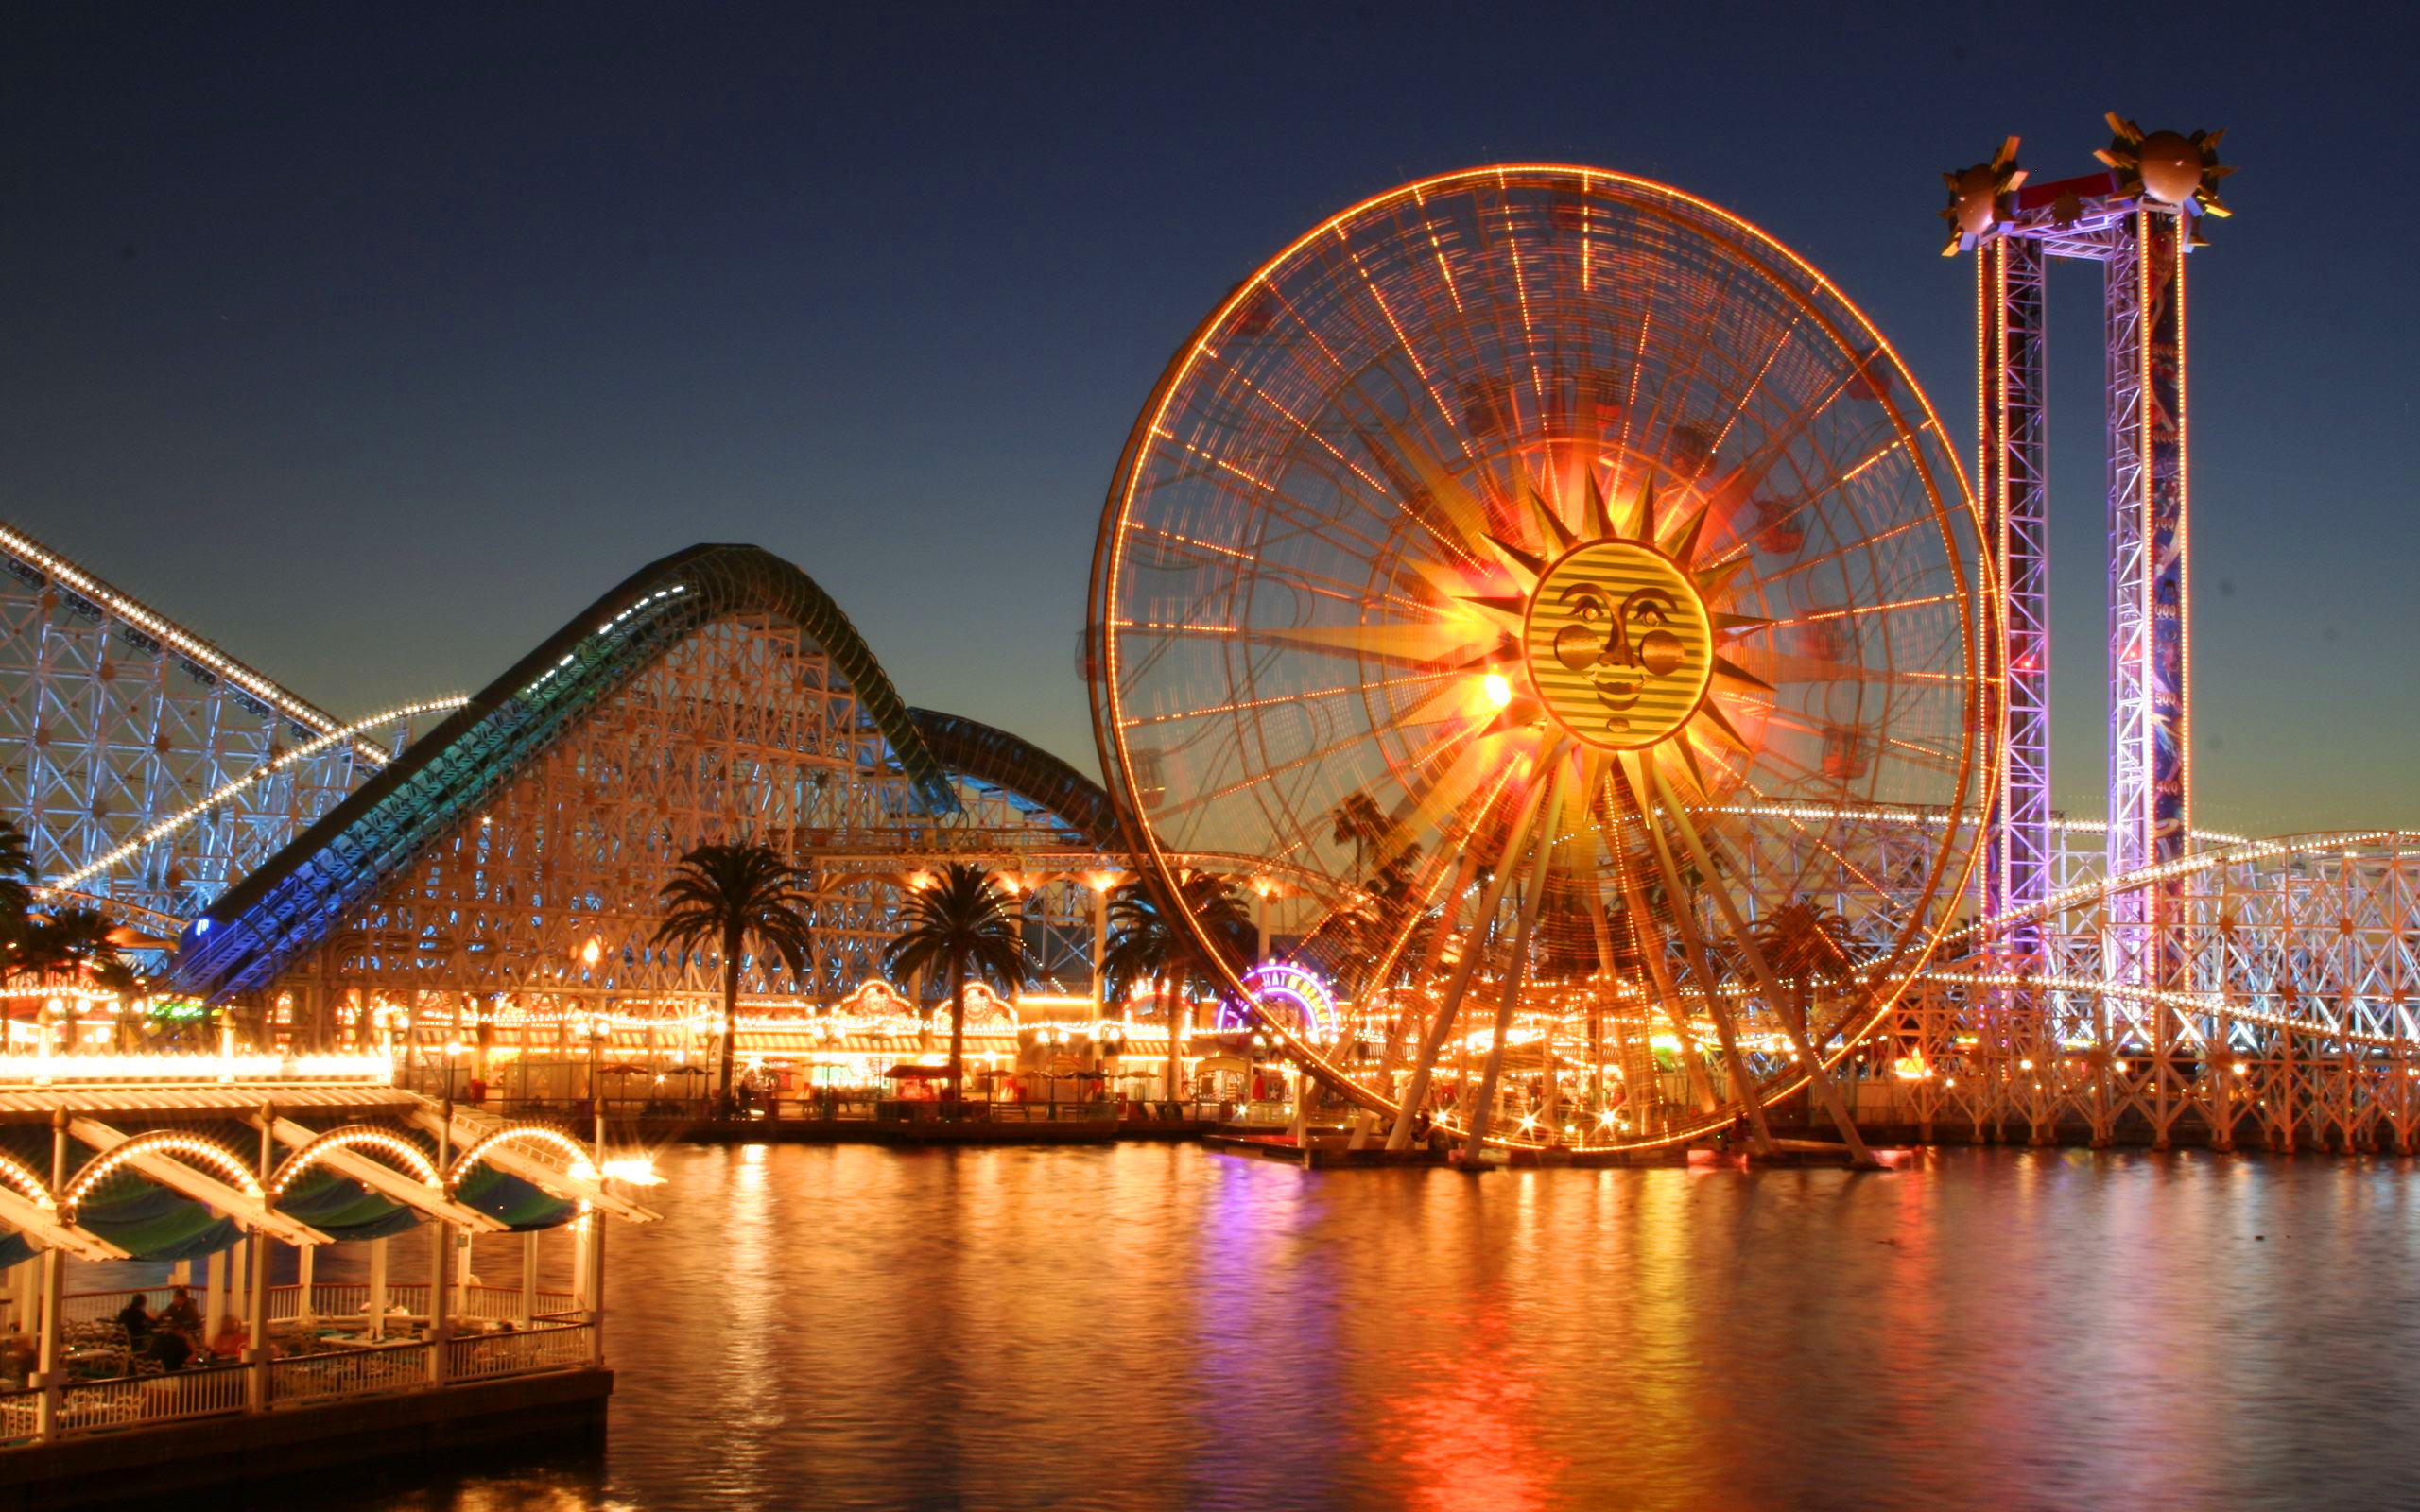 A gigantic Ferris Wheel with a sun image in the middle, and other rides in an amusement during dusk. 